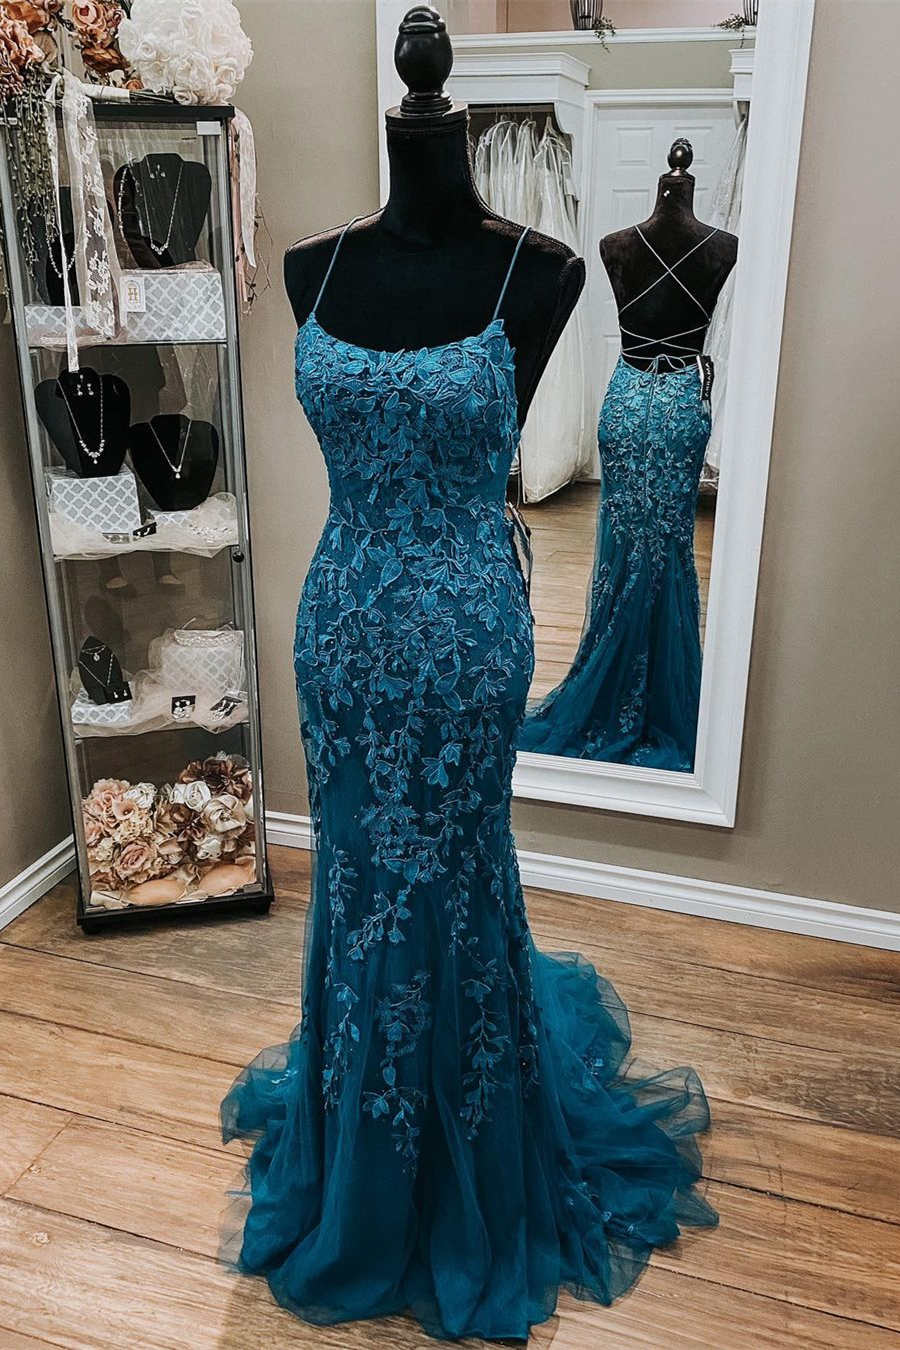 Unique Lace Appliques Long Prom Dress Outfits For Girls,Back Open Gala Formal Dresses